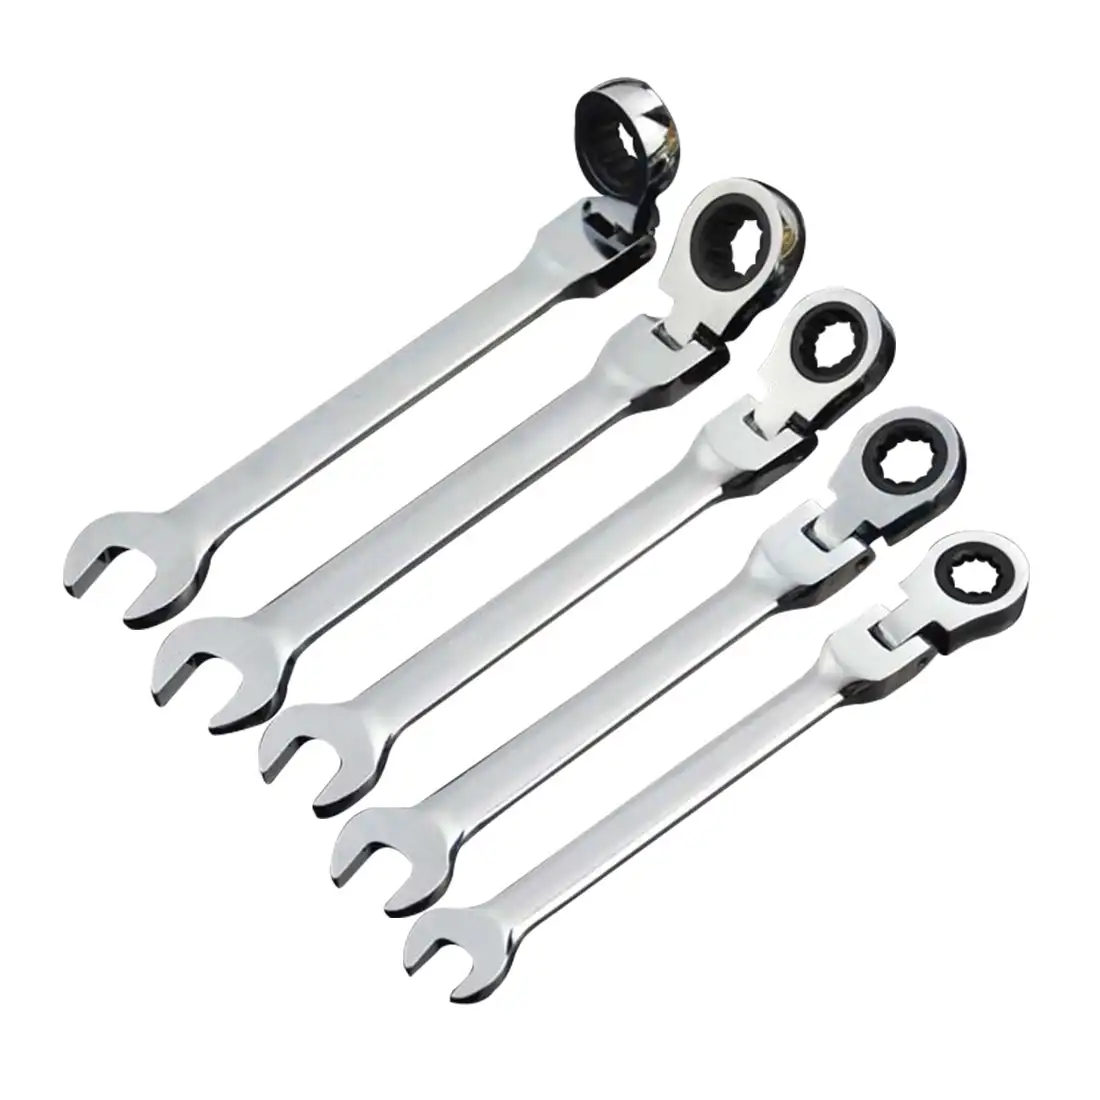 6-32 mm Repair Tools Open End Wrenches Flexible Ratchet Wrench Set To Bike Torque Wrench Spanner